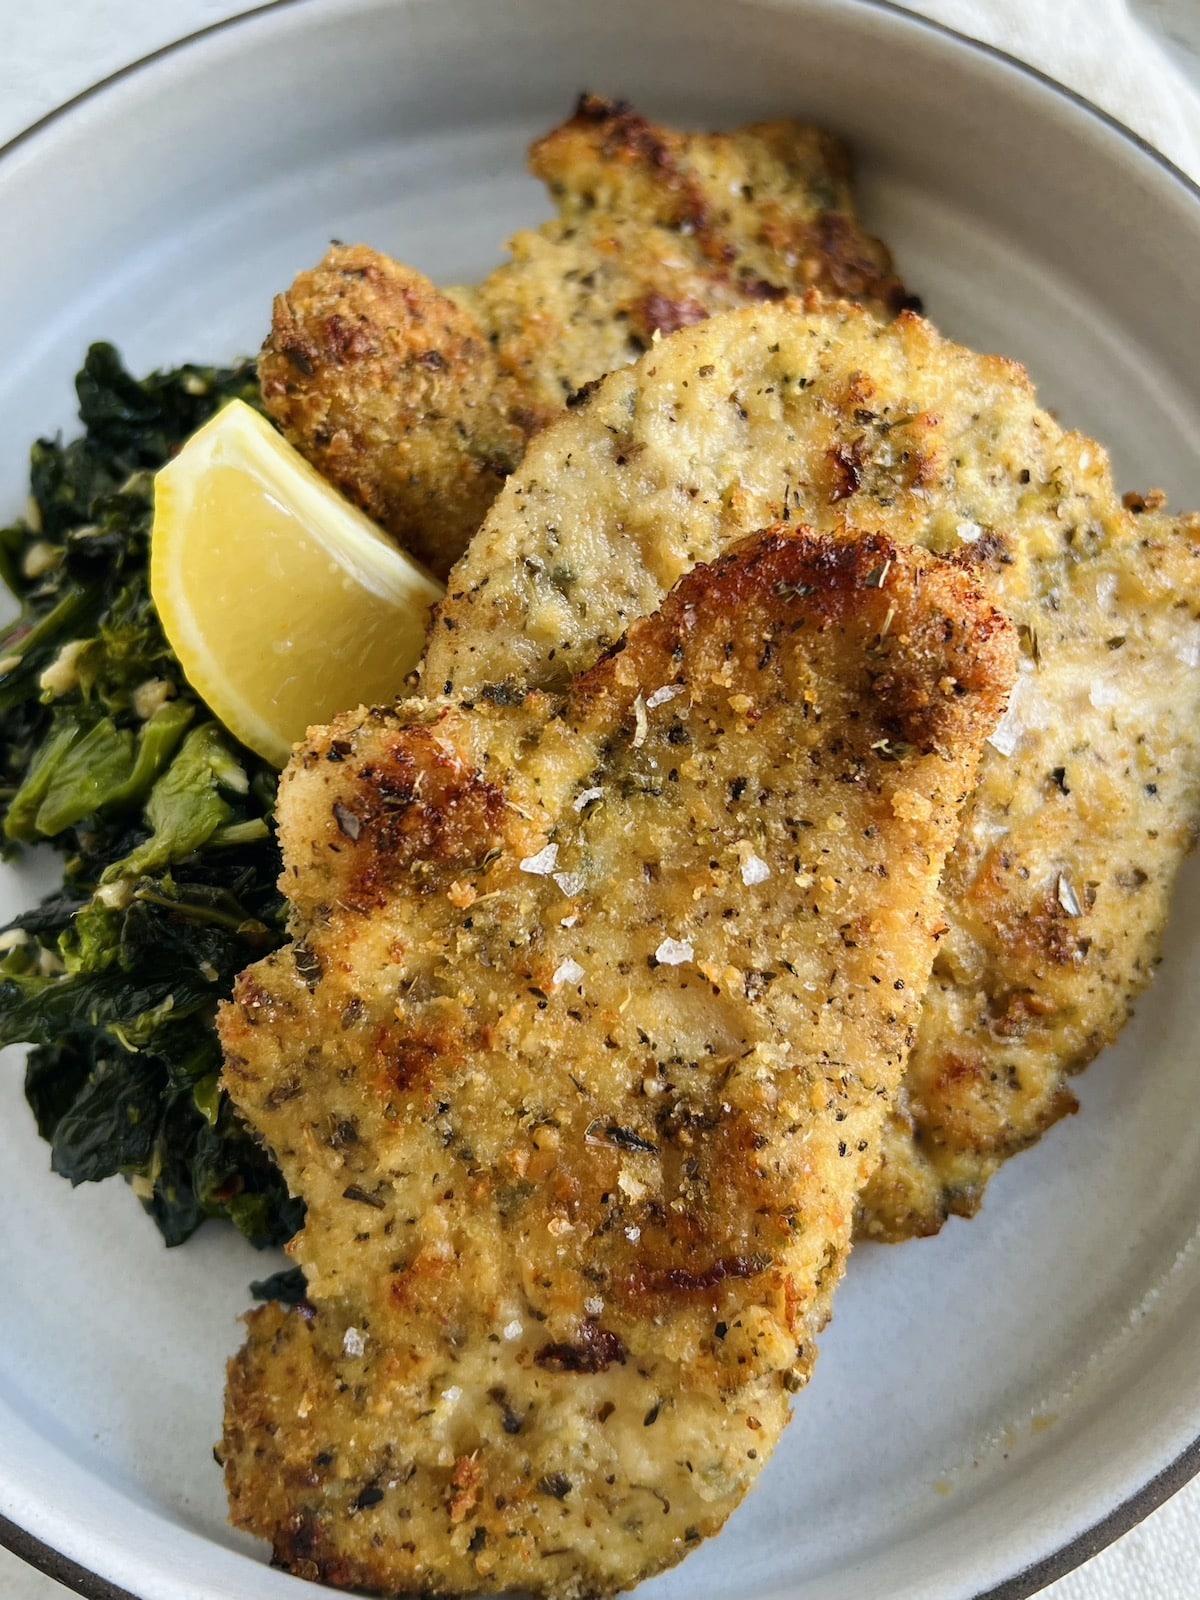 Baked chicken cutlets, Italian style, on plate with sautéed broccoli rabe and lemon wedge.